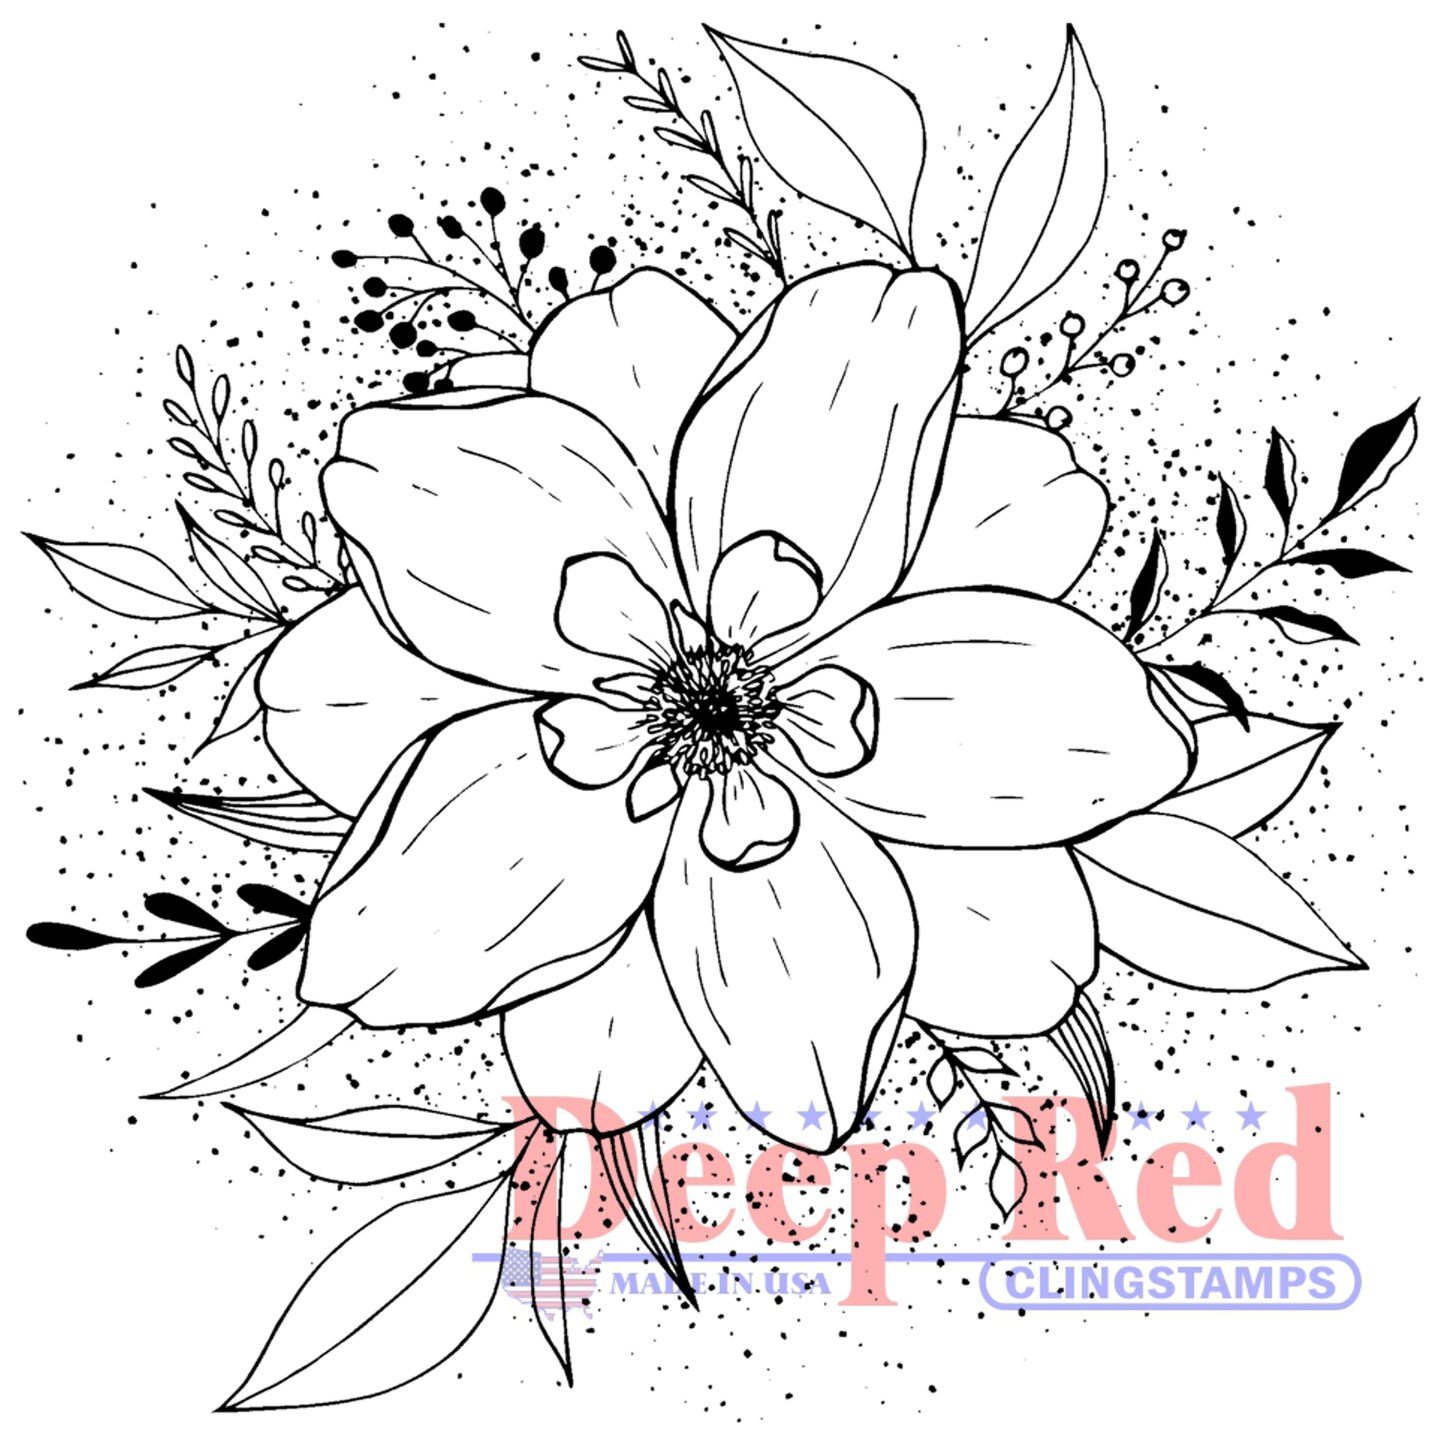 Deep Red Stamps Flower Burst Rubber Cling Stamp  3.1 x 3.1  inches